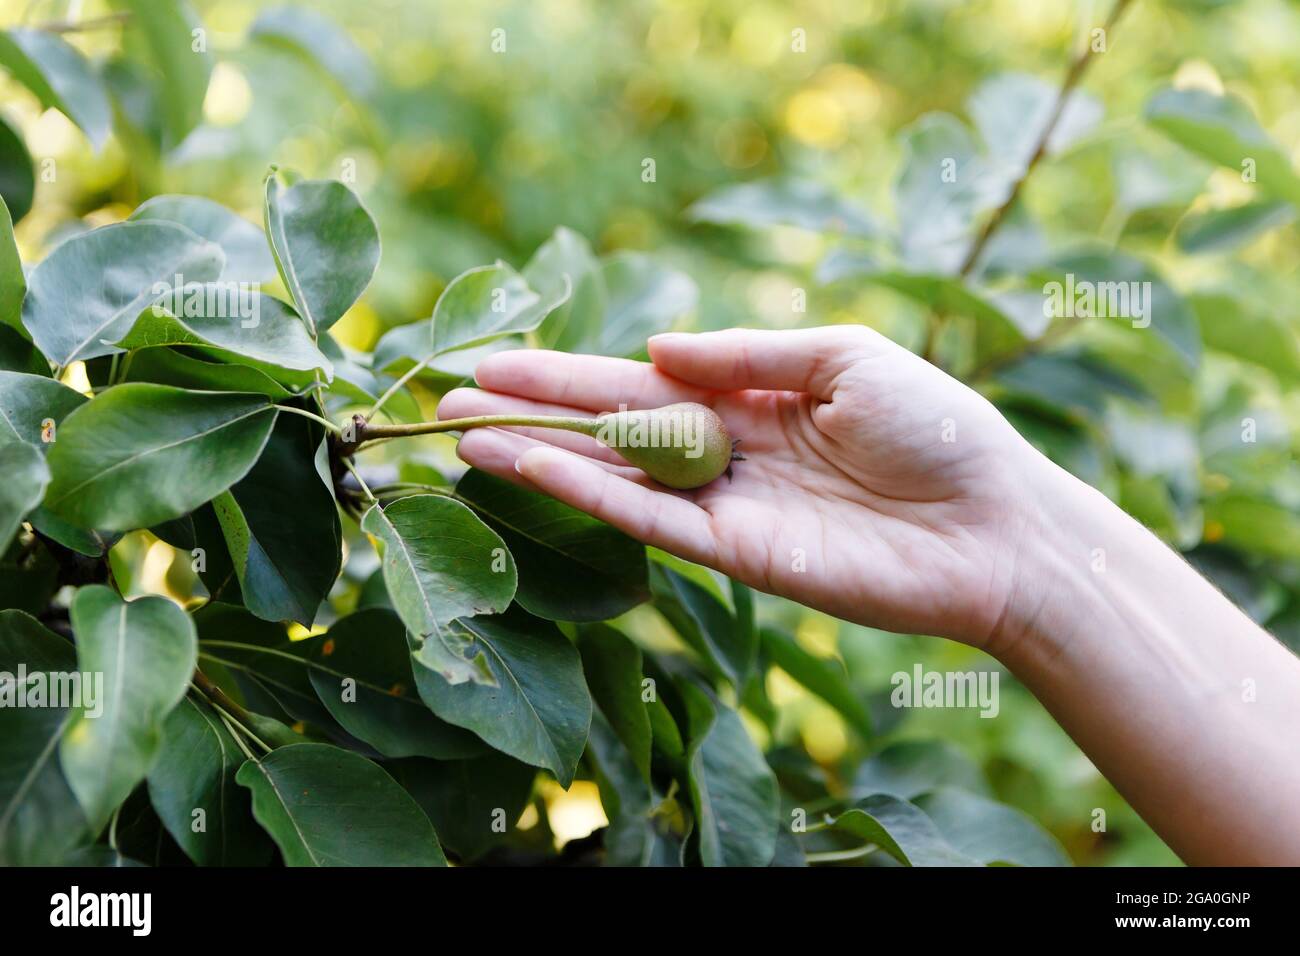 young woman farmer holding a young pear fruit Stock Photo